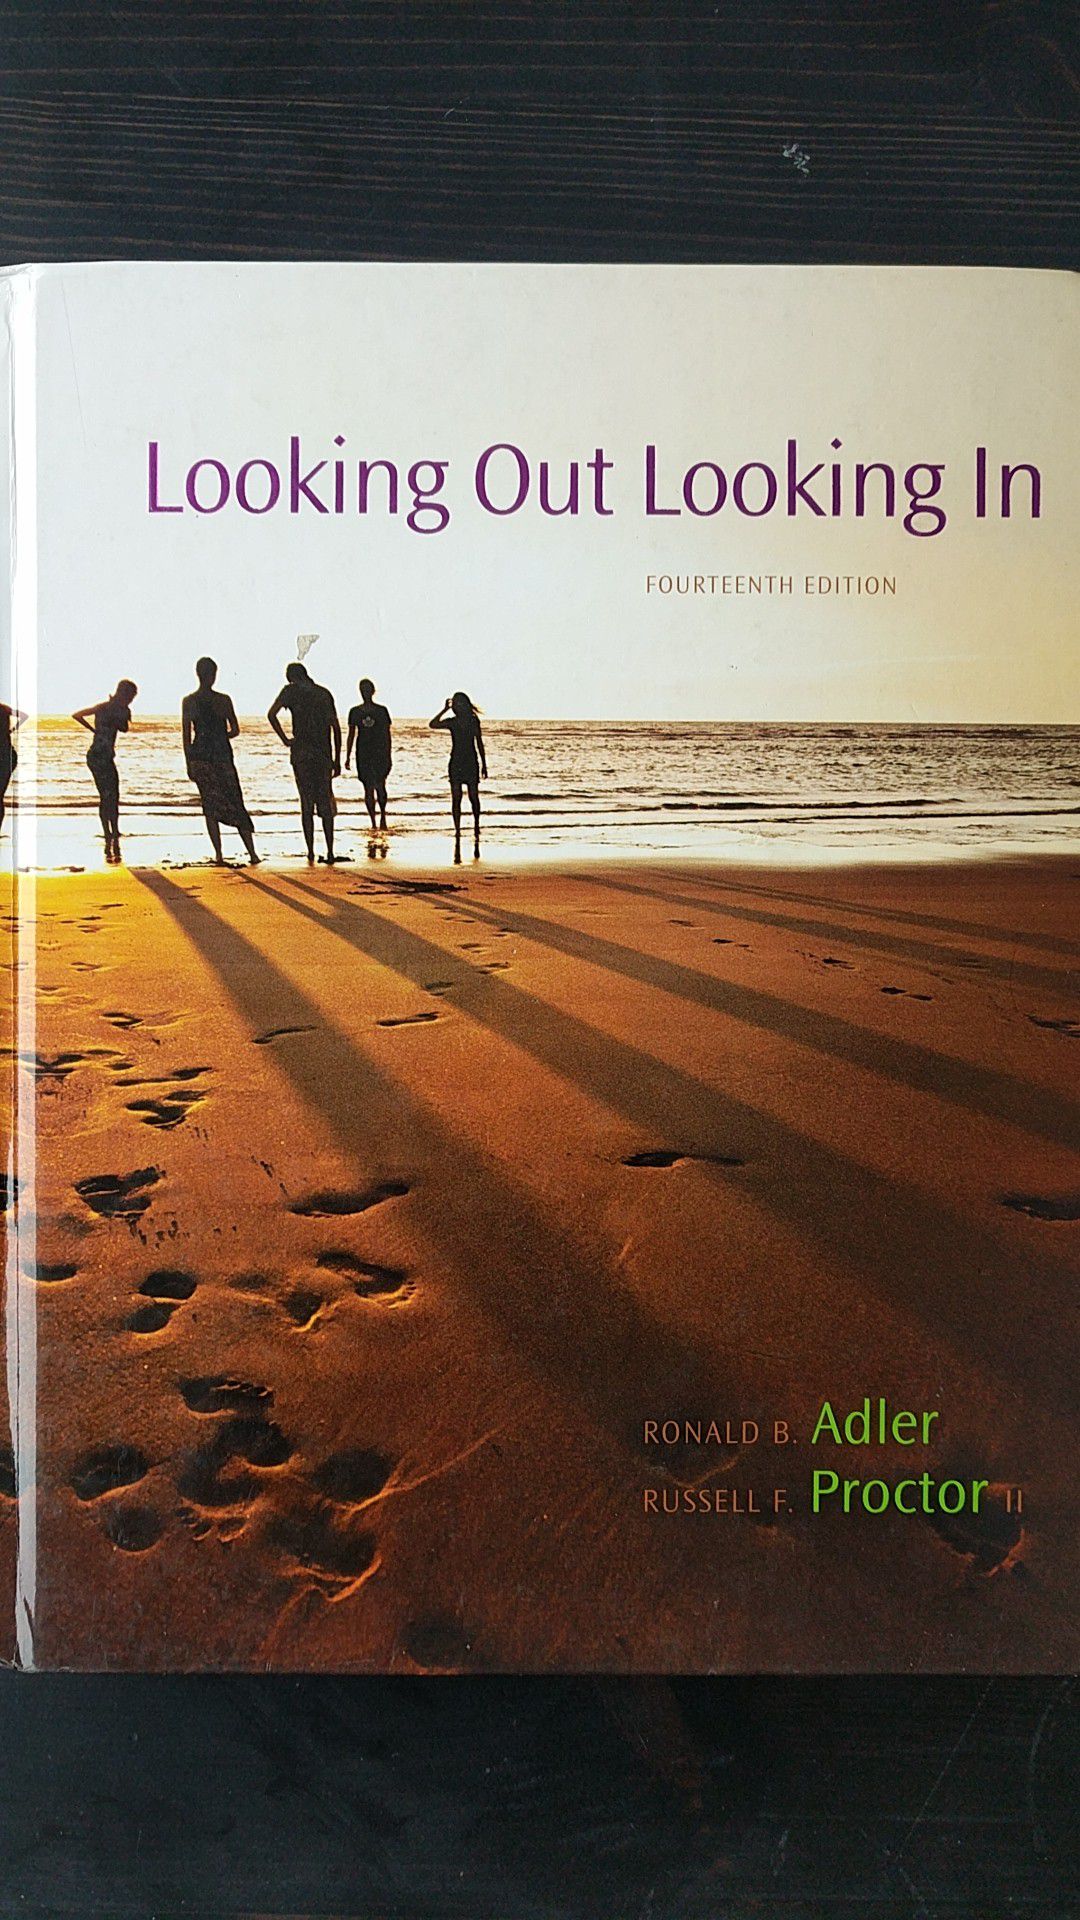 Looking Out Looking in, 14th Edition, Ronald B Adler